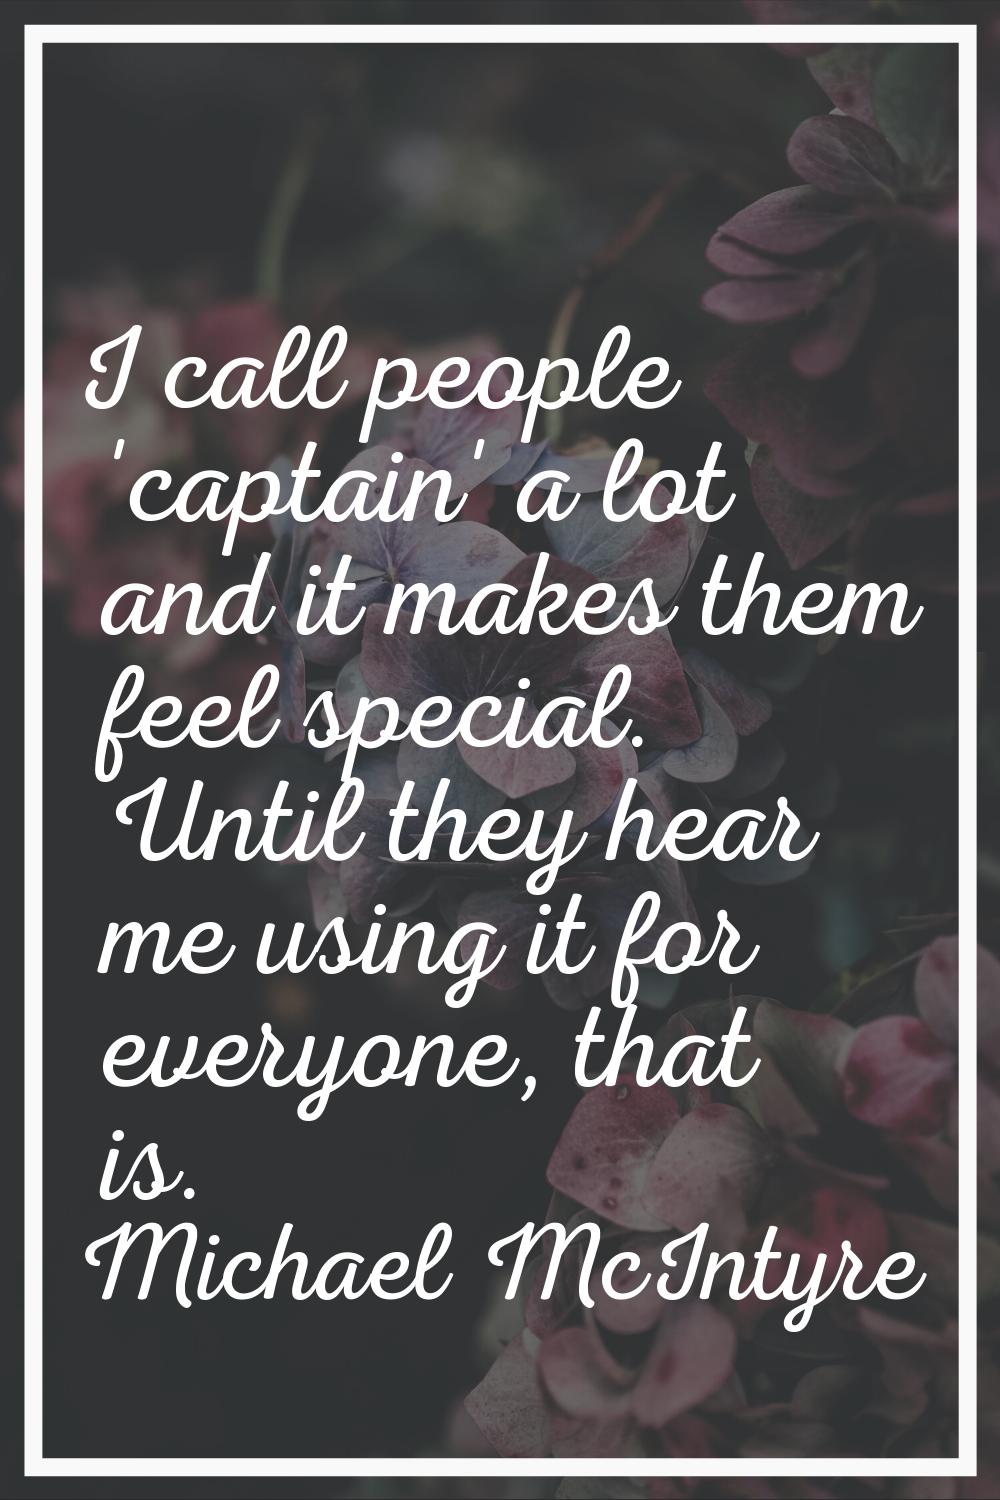 I call people 'captain' a lot and it makes them feel special. Until they hear me using it for every